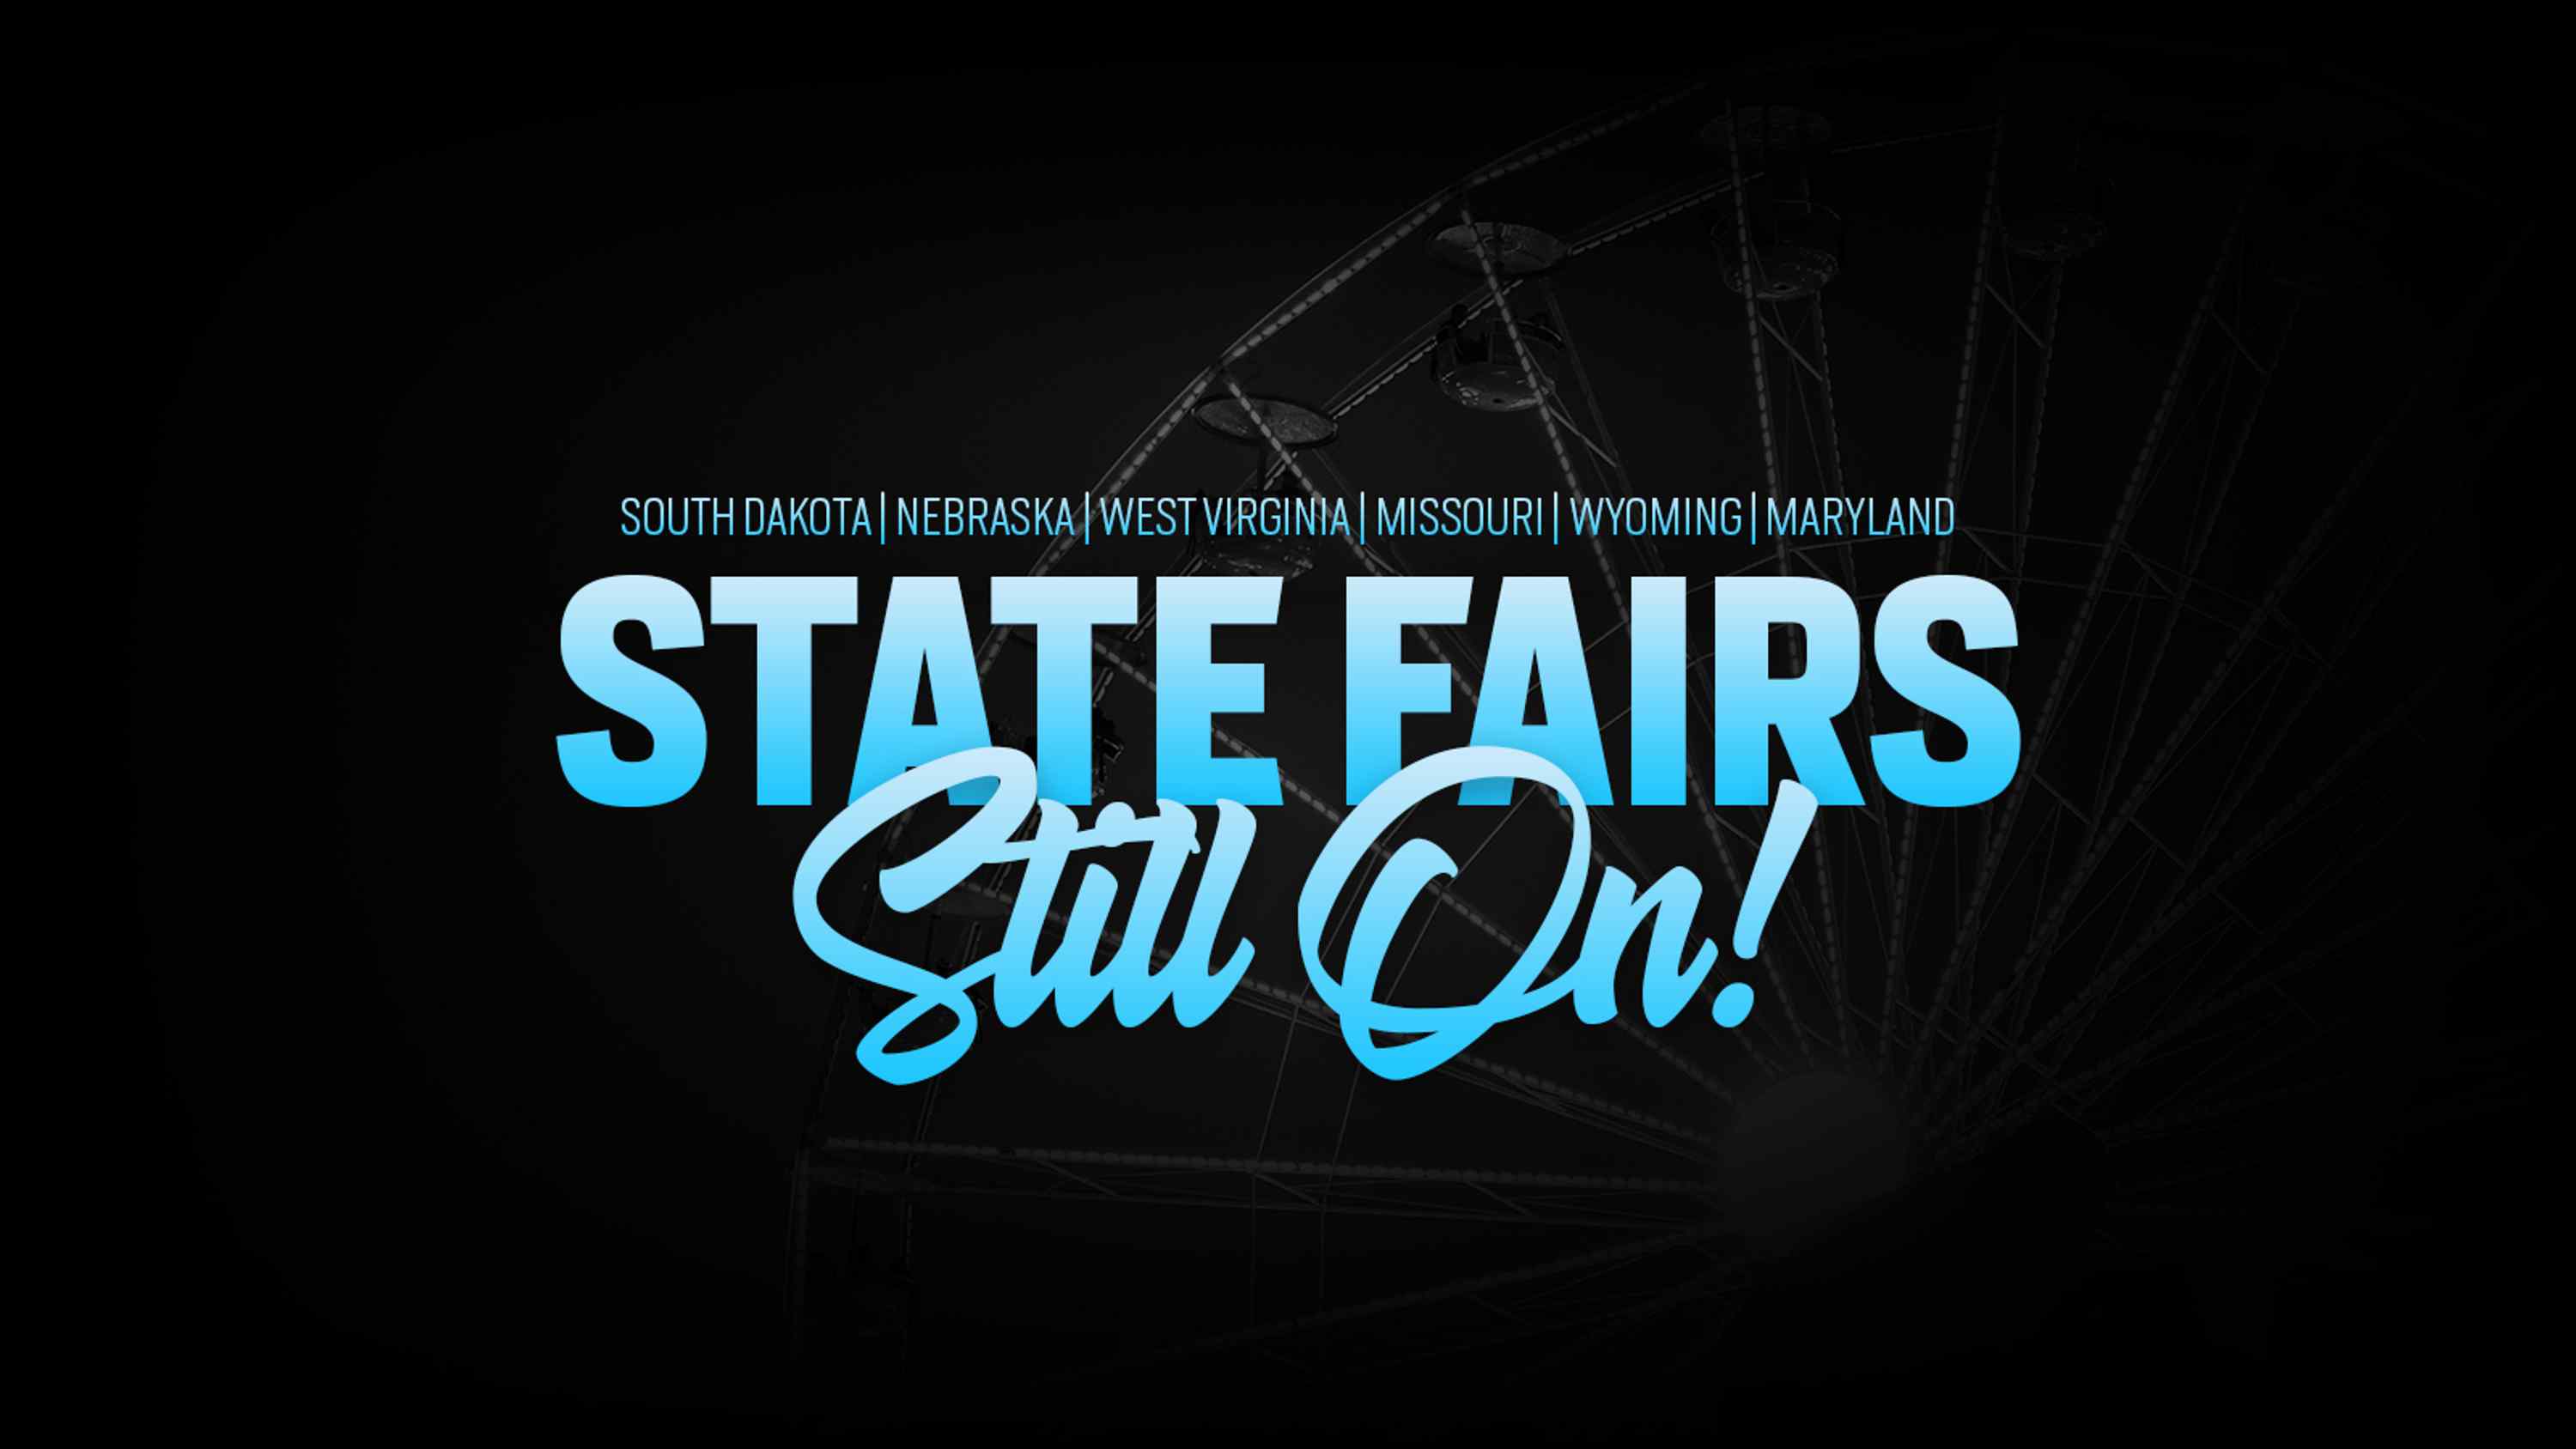 These State Fairs are Still Scheduled